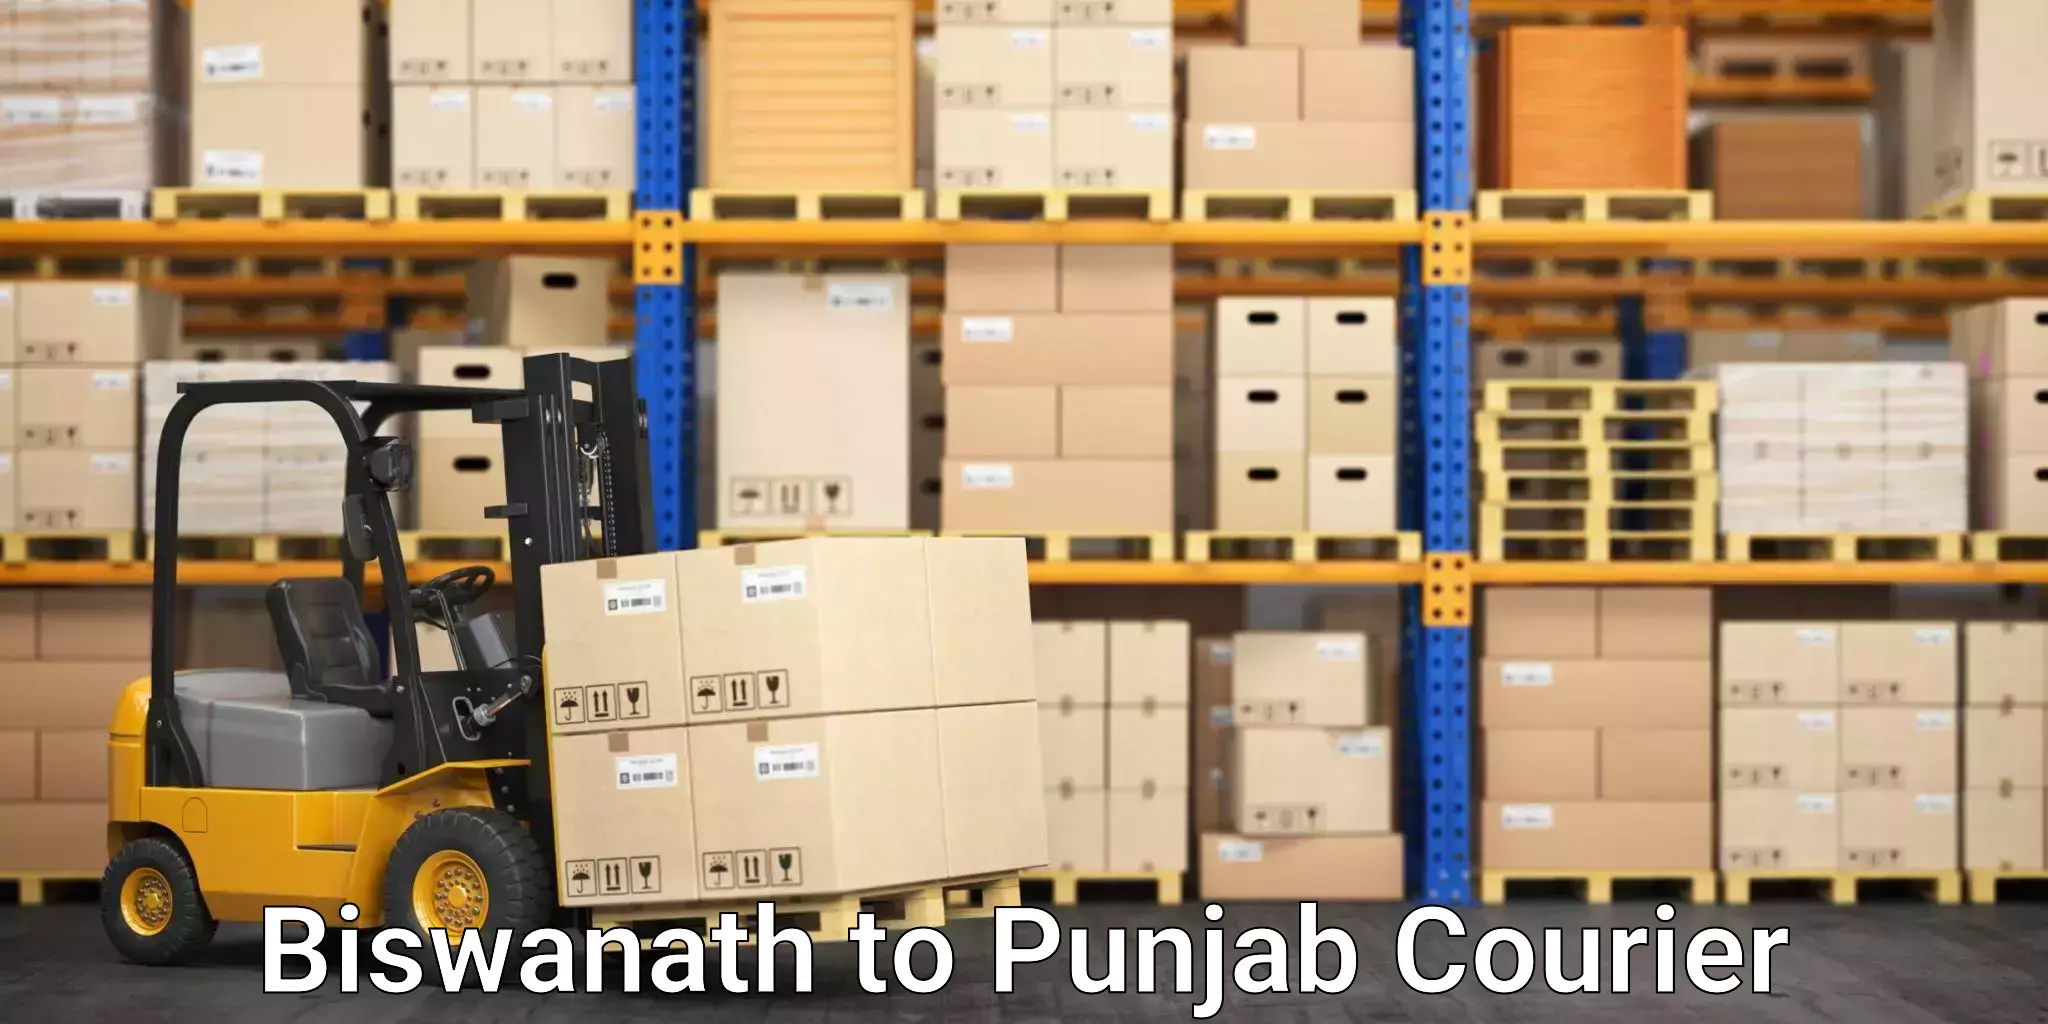 Courier service partnerships Biswanath to Barnala